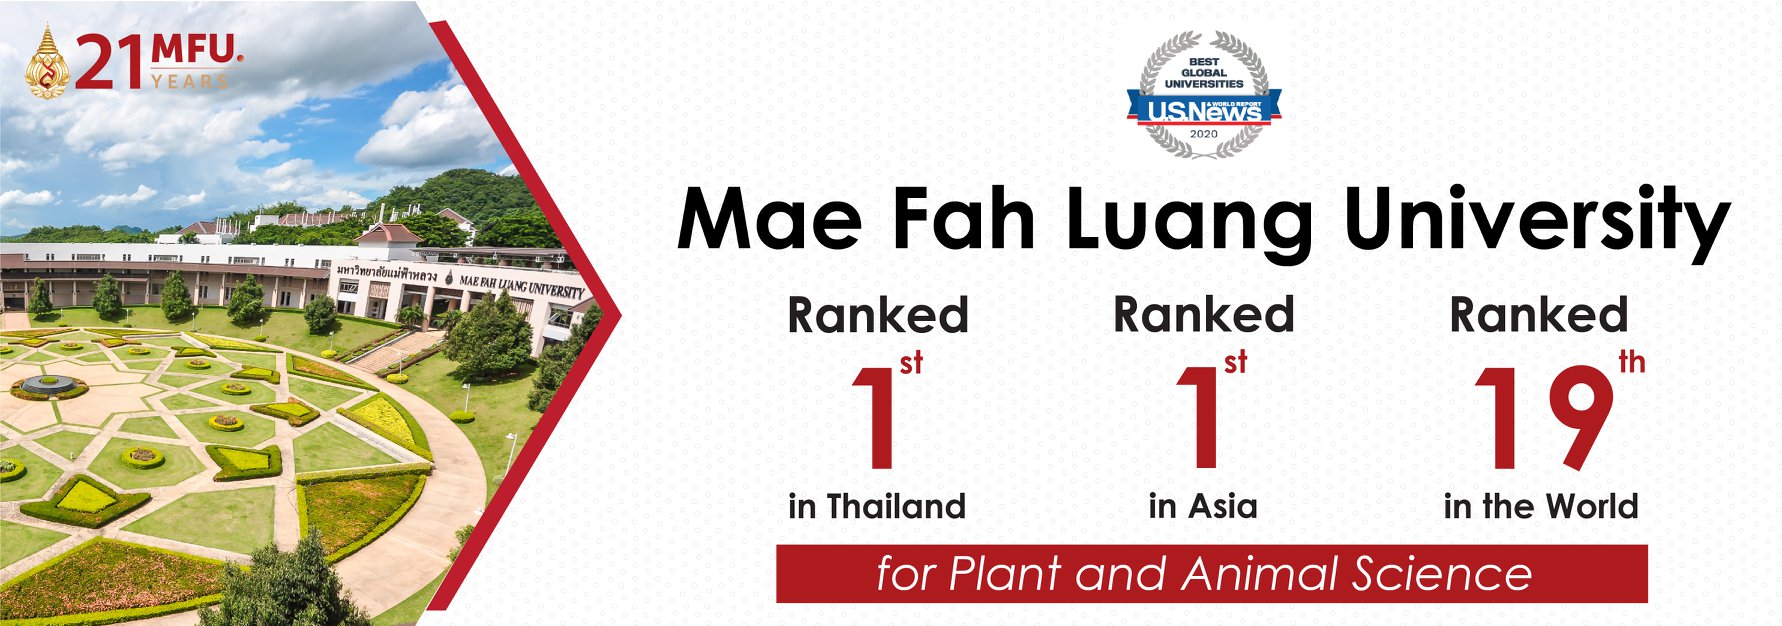 MFU Ranked First for Plant and Animal Science in Thailand and Asia